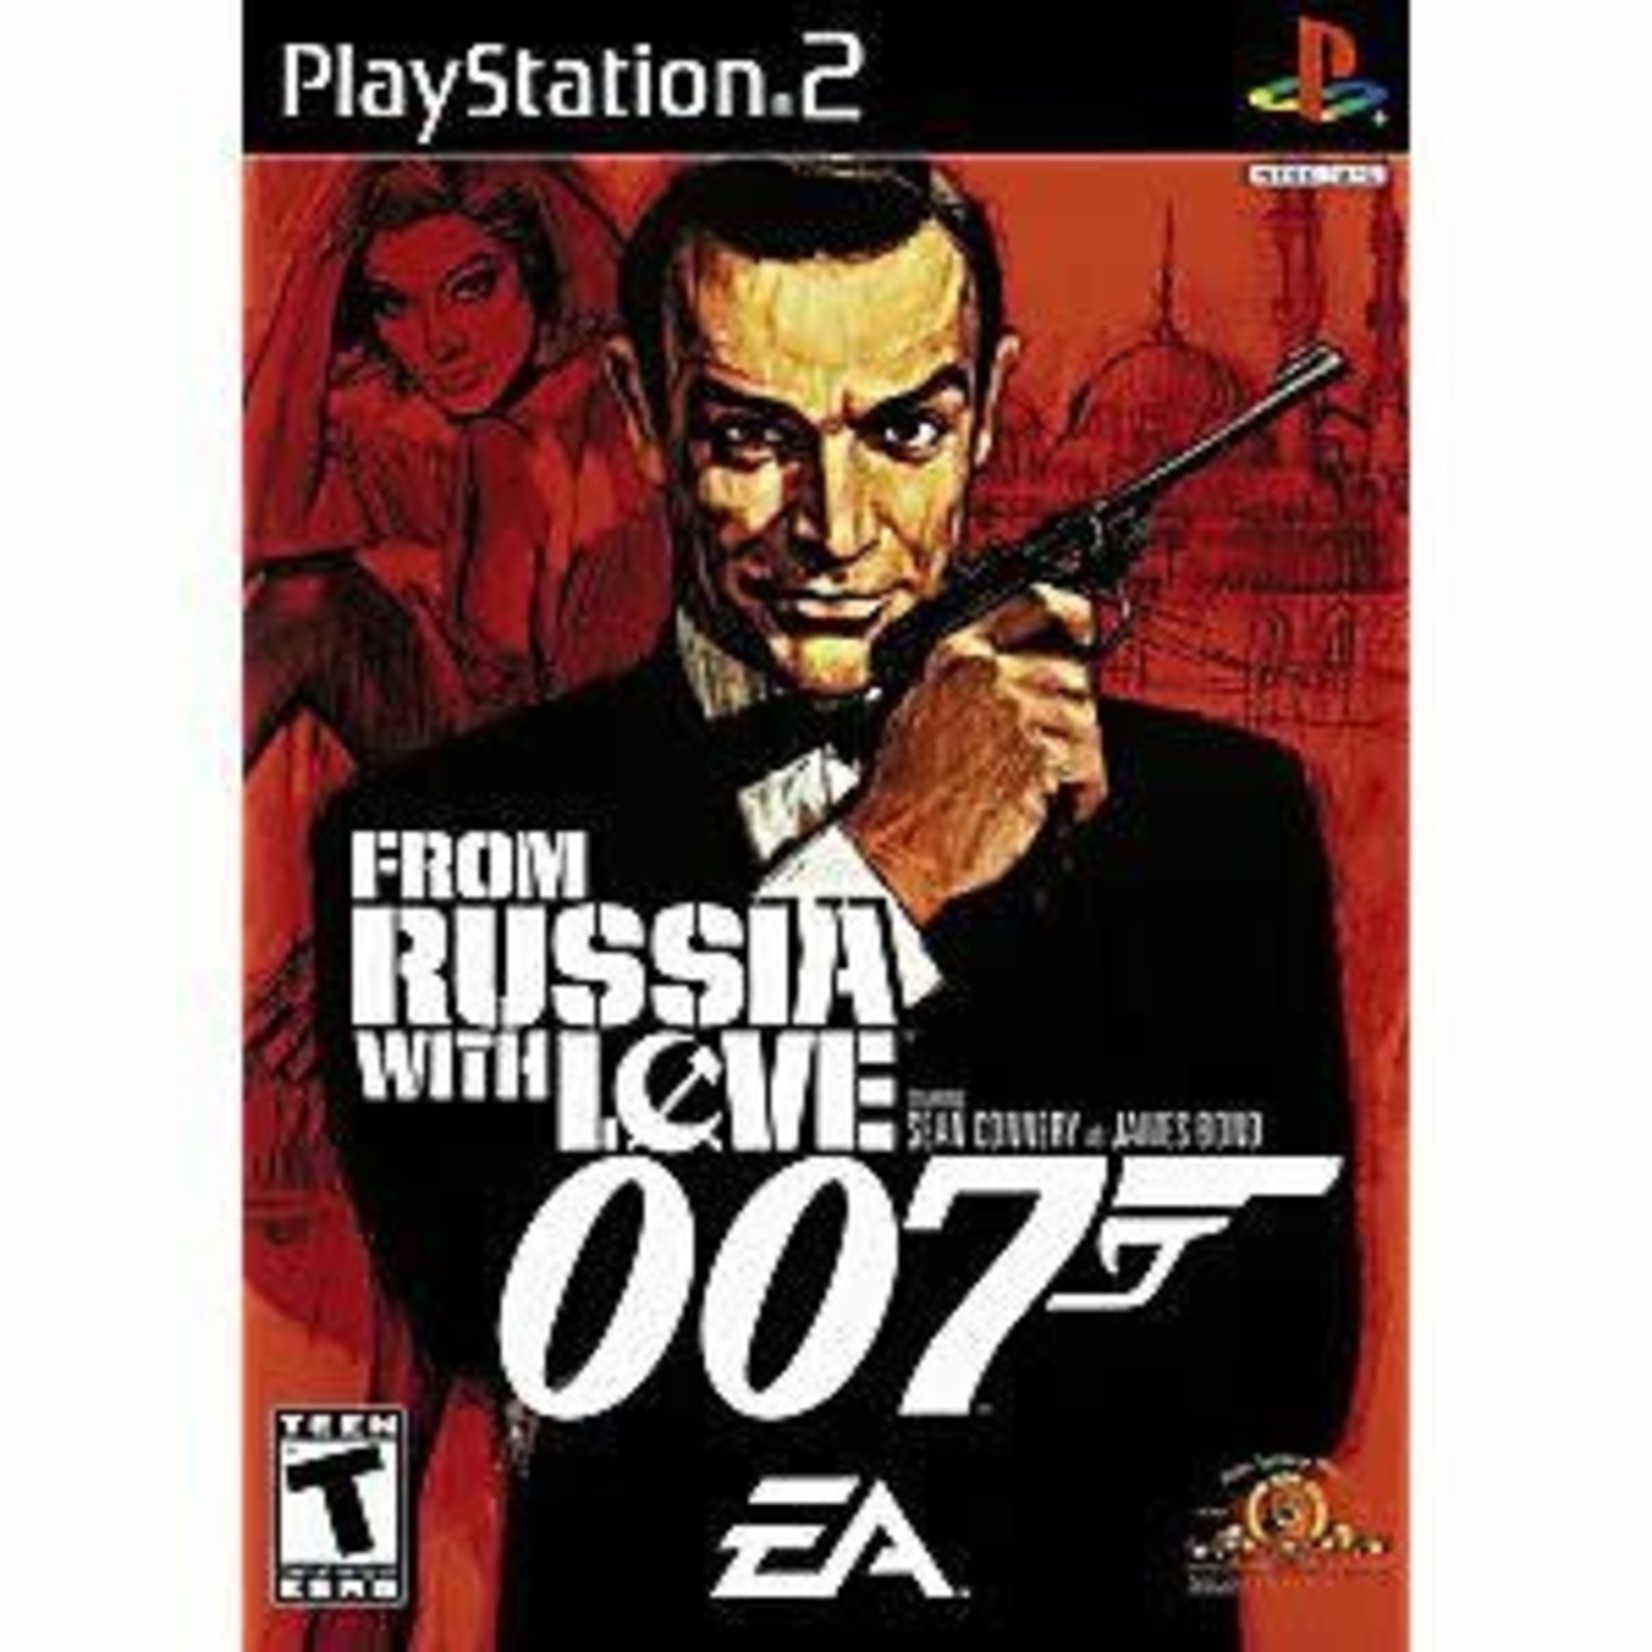 PS2U-FROM RUSSIA WITH LOVE 007